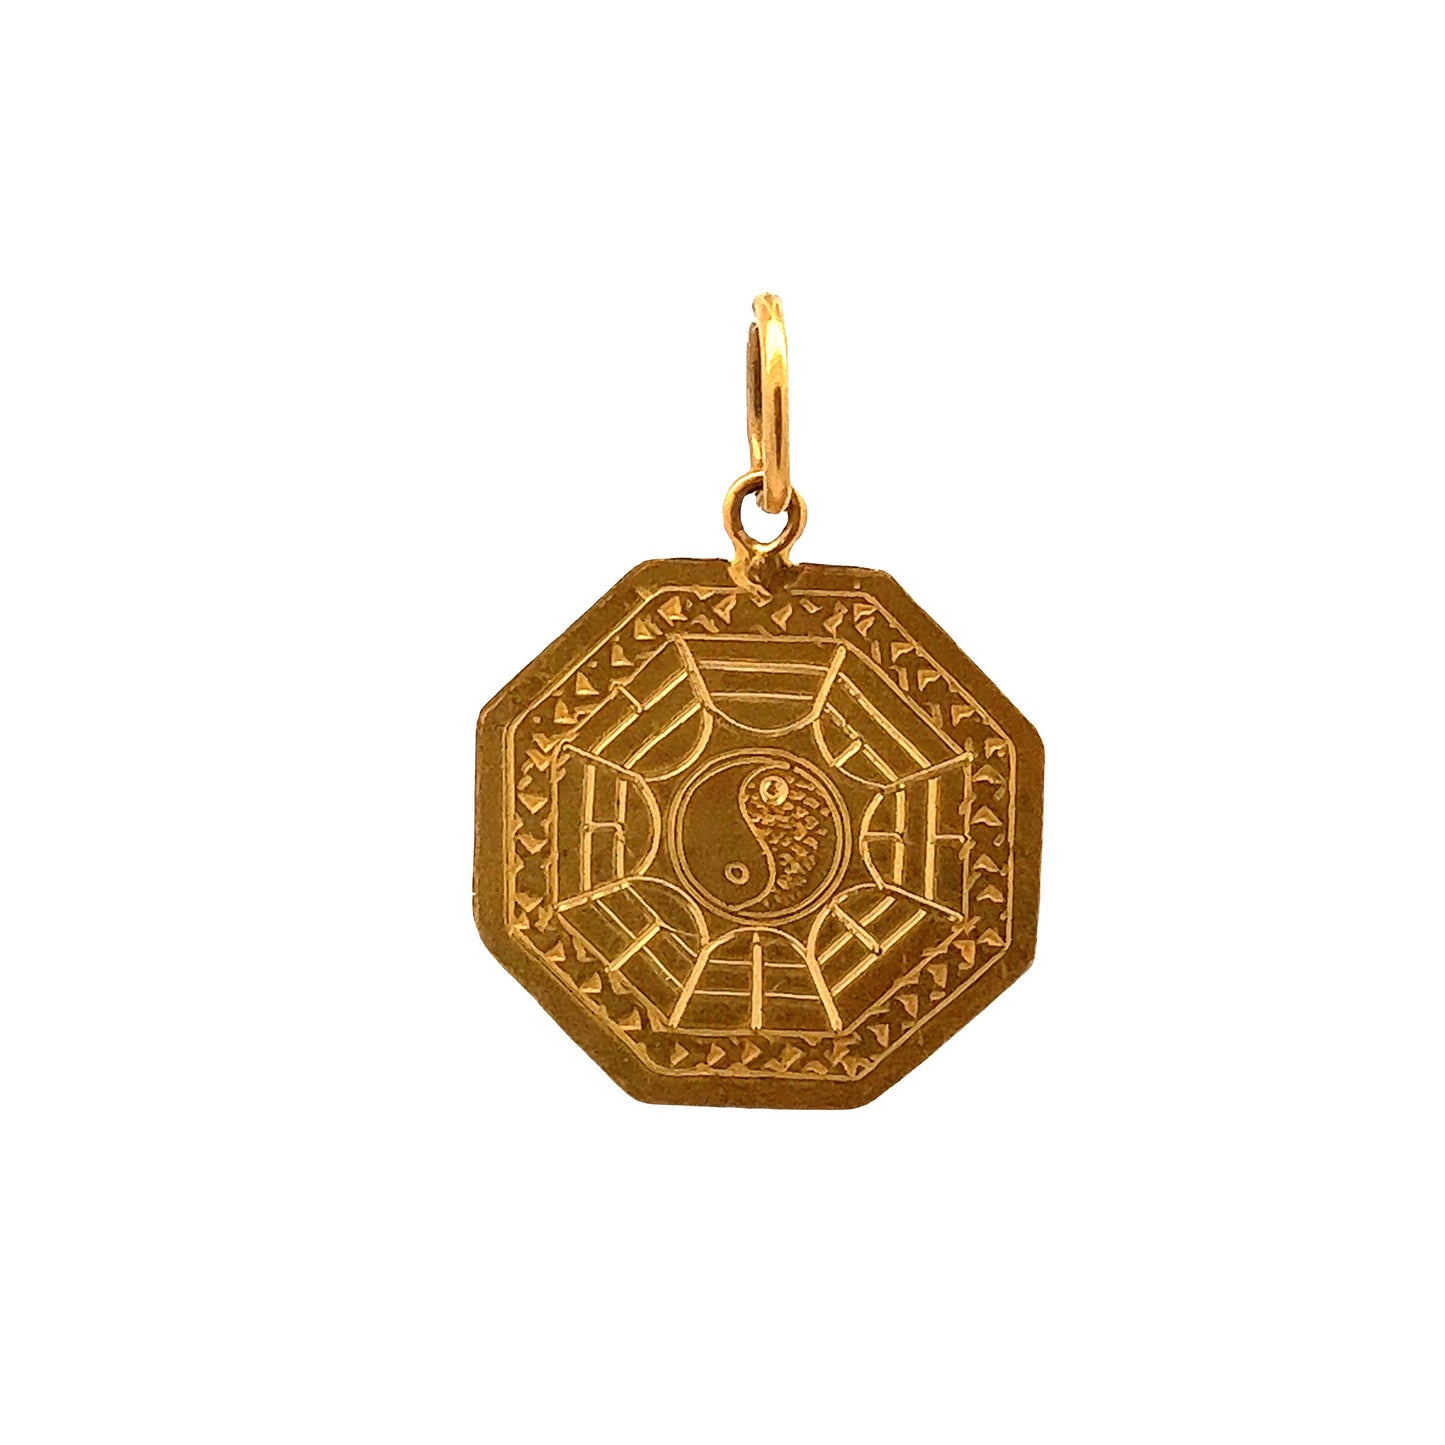 GOLD PENDANT ( 22K ) ( 3.33g ) - 0012529 Chain sold separately